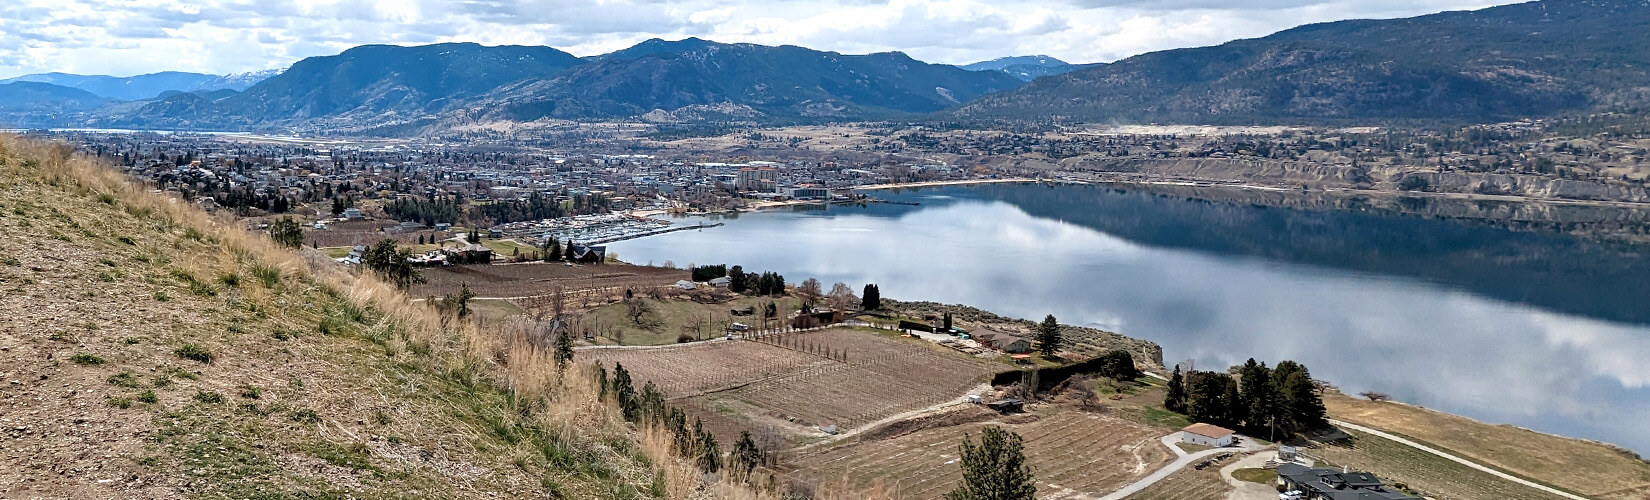 10+ Fantastic Free Things to Do in Penticton BC & More Nearby :: I've Been Bit! Travel Blog